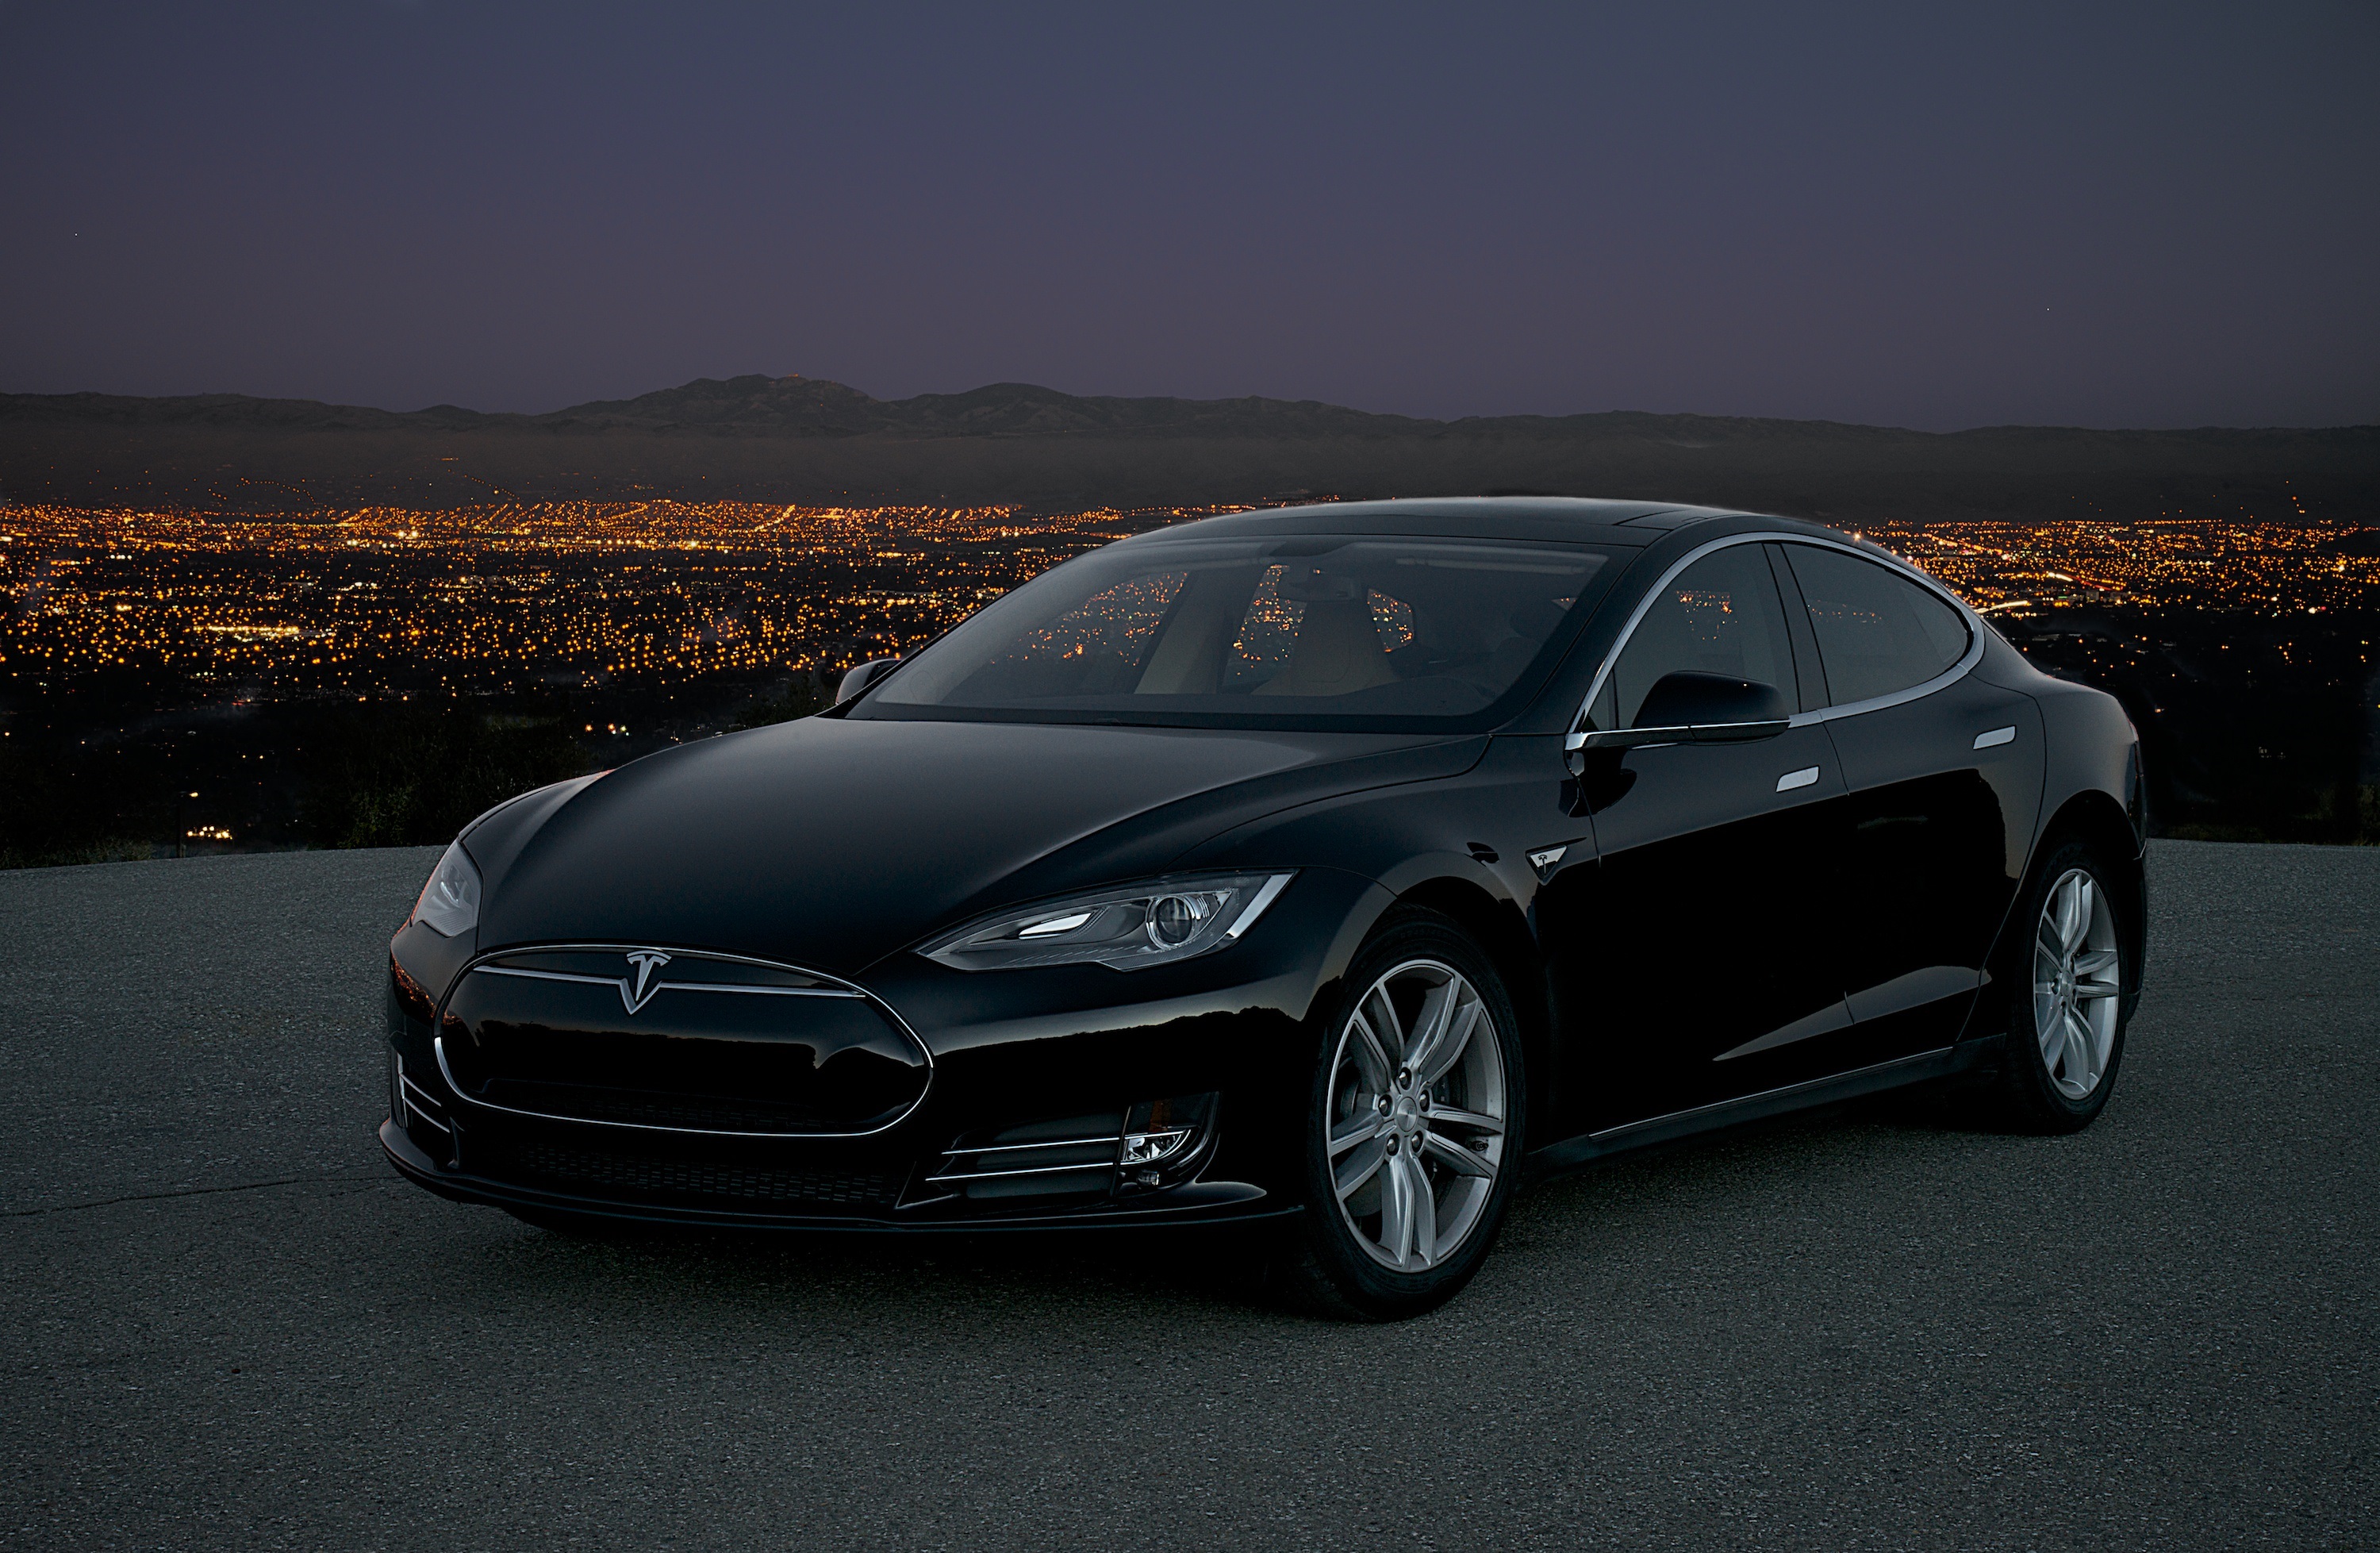 Pictures of a tesla model s